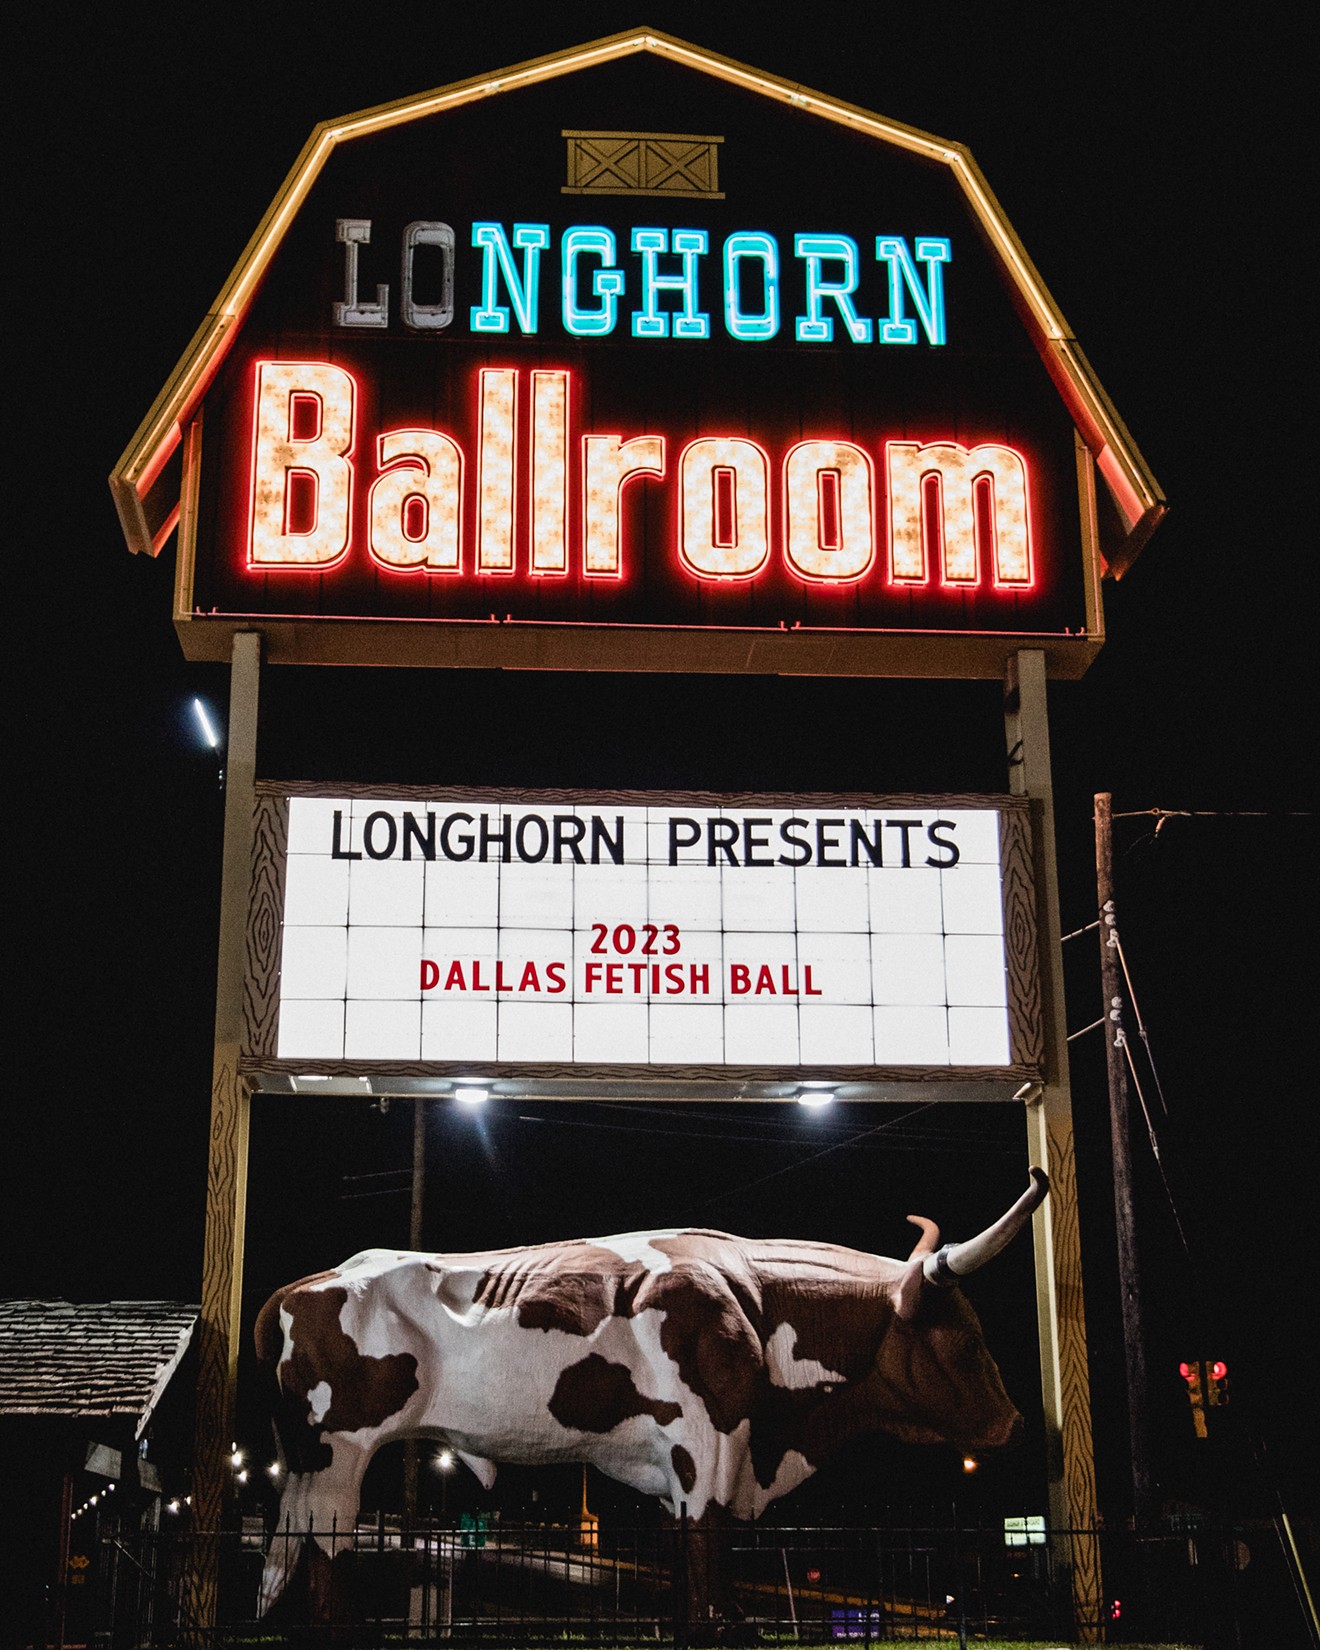 The 24th Dallas Fetish Ball was hosted at the iconic Longhorn Ballroom.